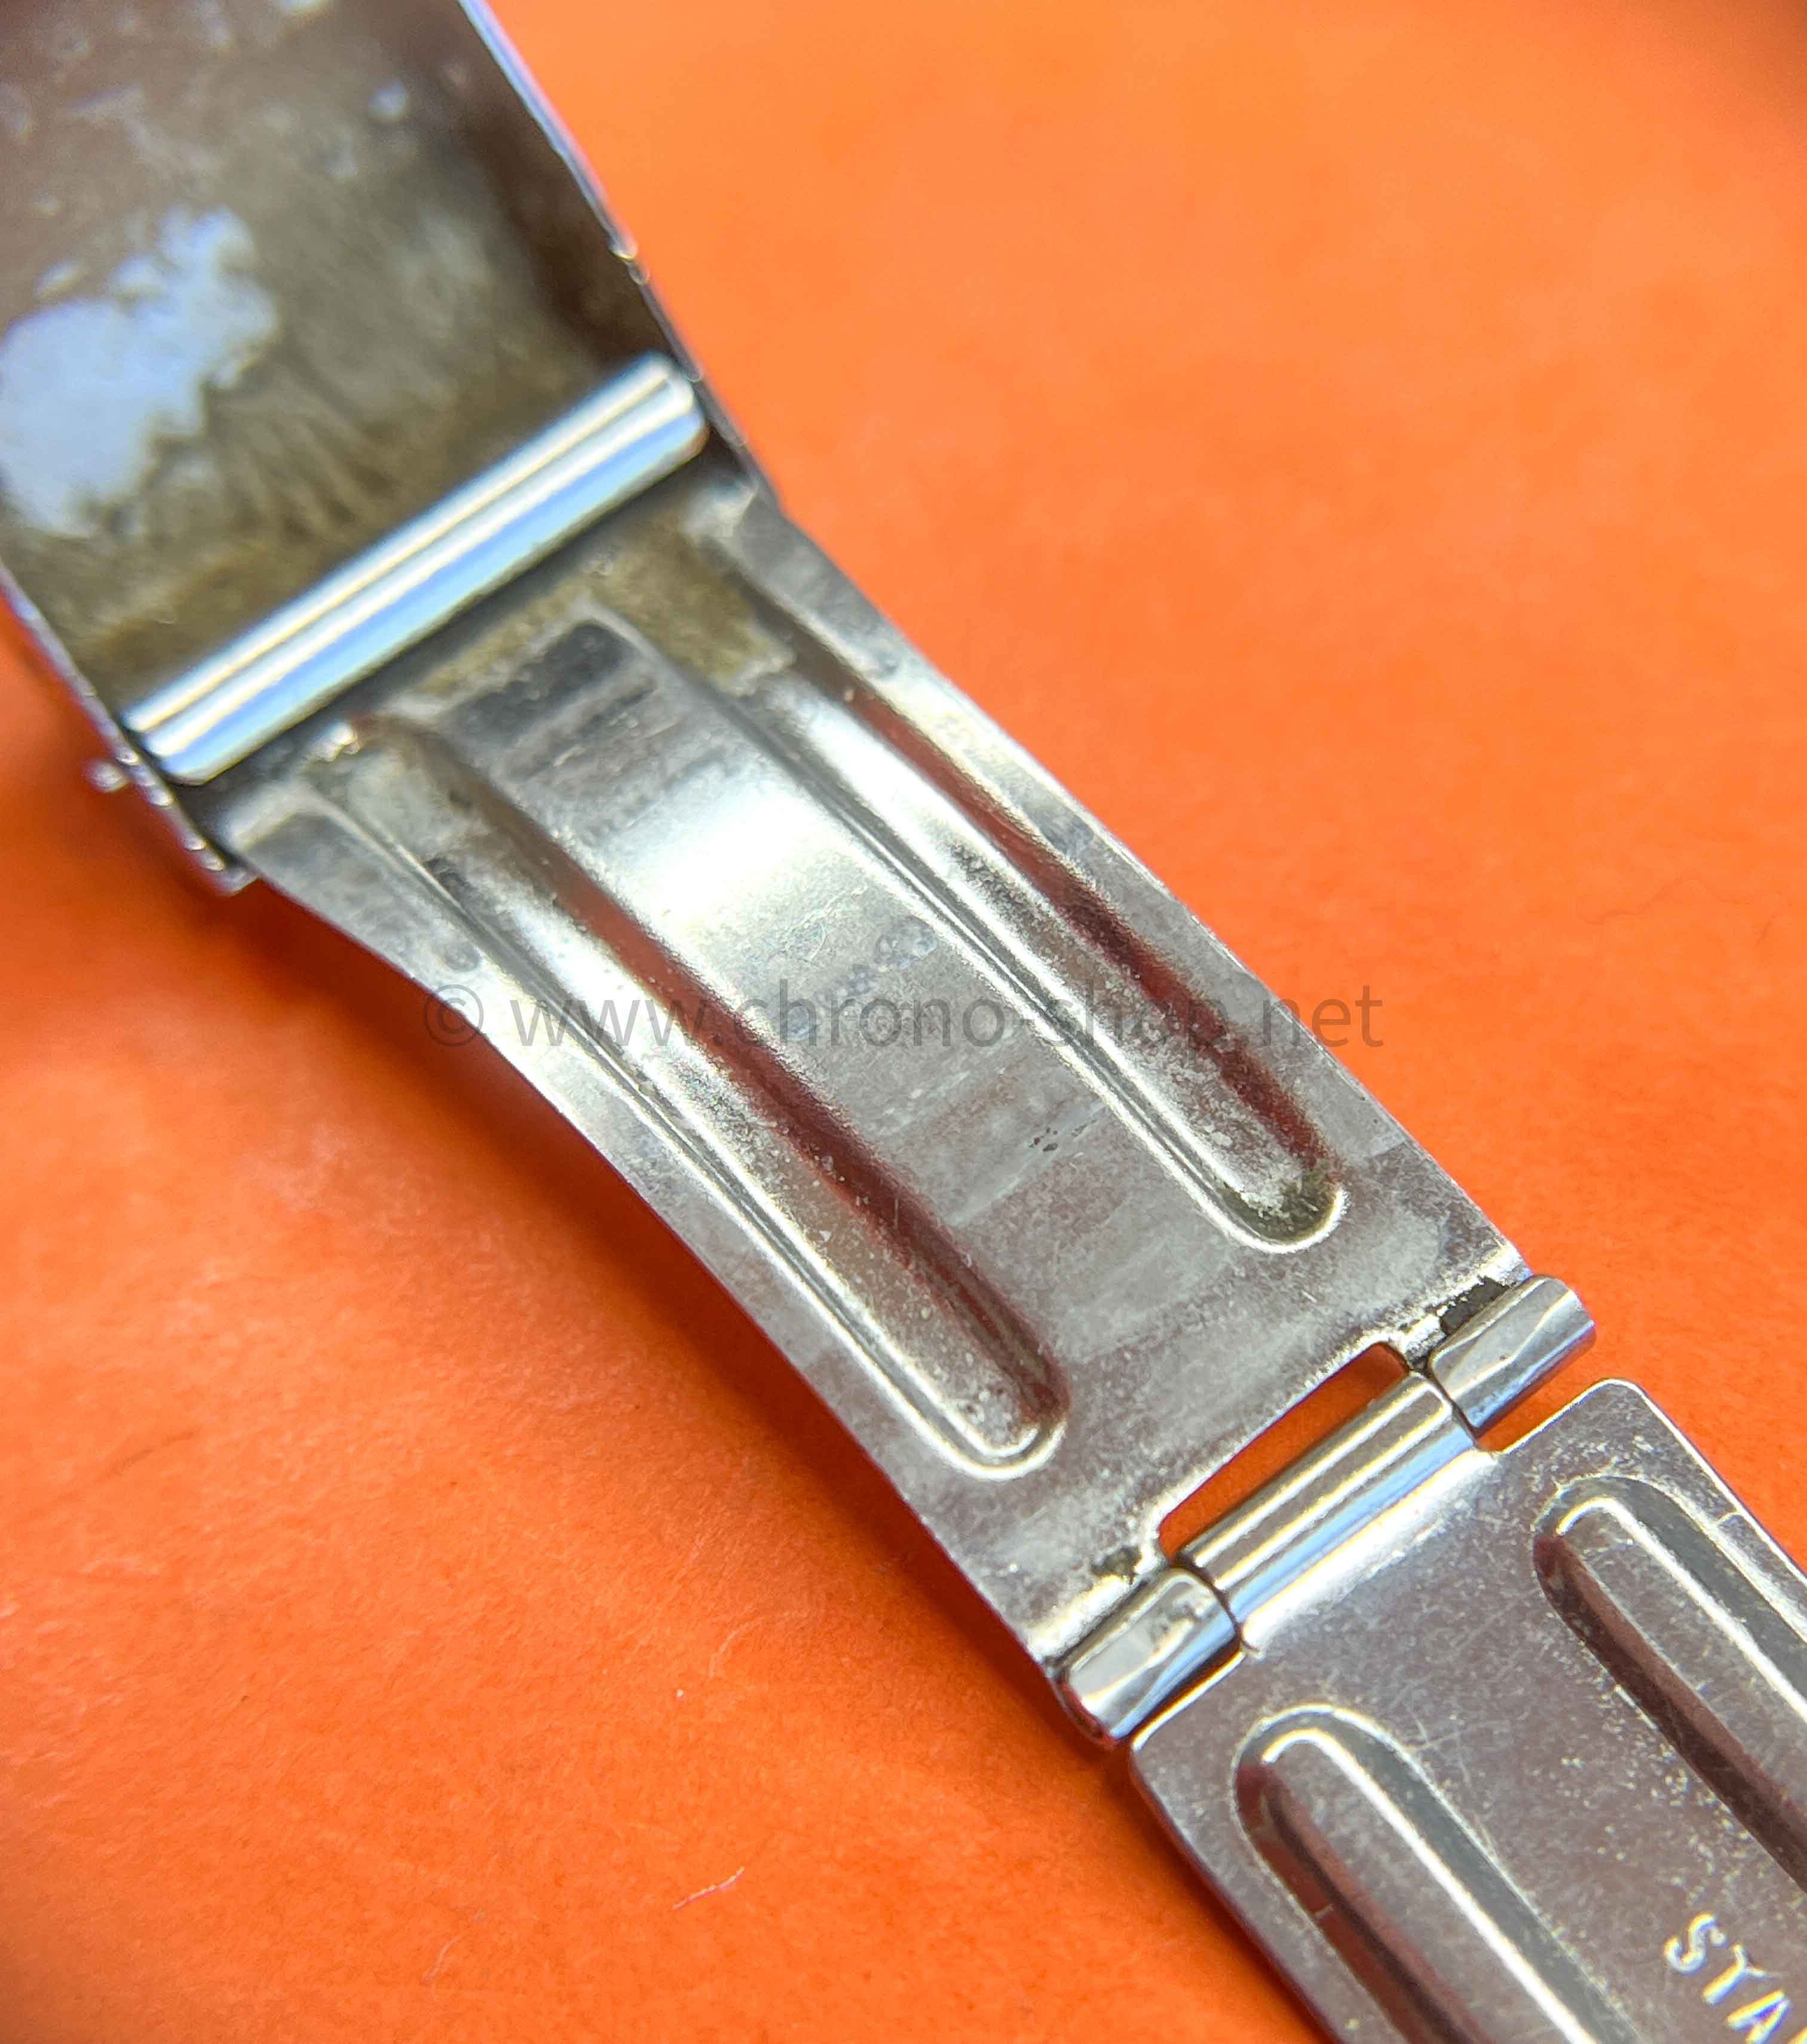 20mm Silver Stainless Steel Replacement Wrist watchband Strap Bracelet  Jubilee with Oyster Clasp For Rolex Subamriner